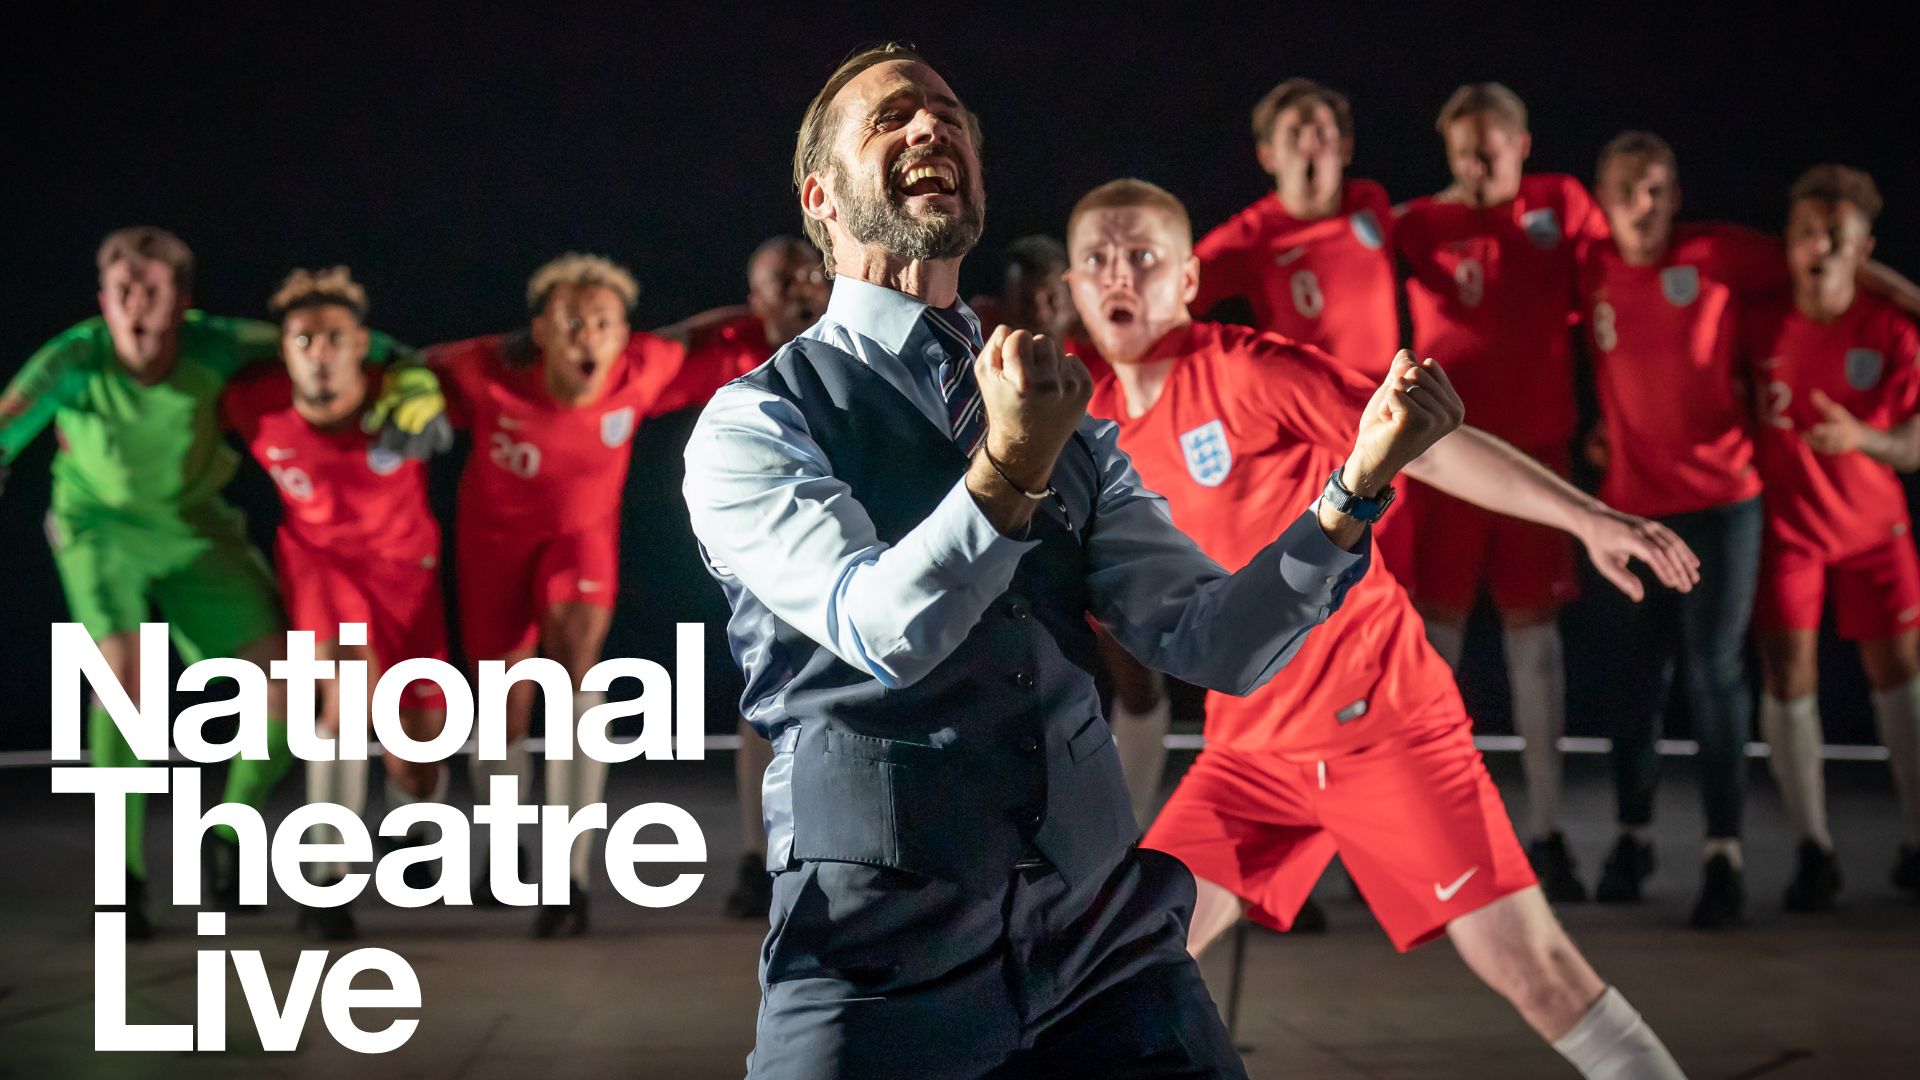 National Theatre Live Grid